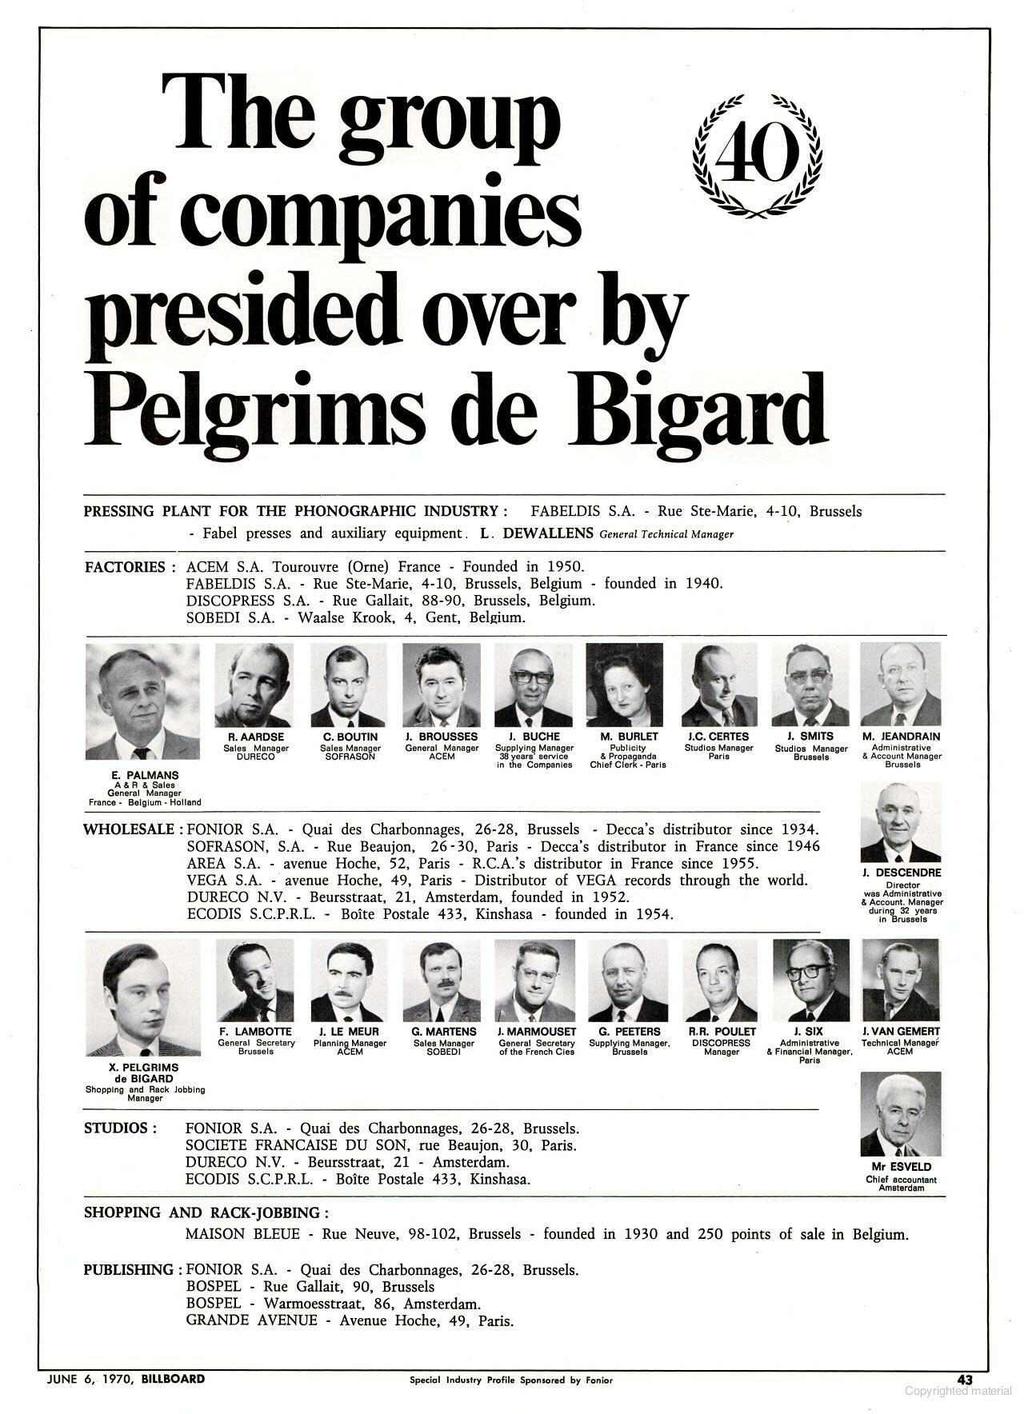 The group of companies presided over by Peig rims de Bigard PRESSING PLANT FOR THE PHONOGRAPHIC INDUSTRY : FABELDIS S.A. Rue Ste Marie, 4 10, Brussels Fabel presses and auxiliary equipment. L.